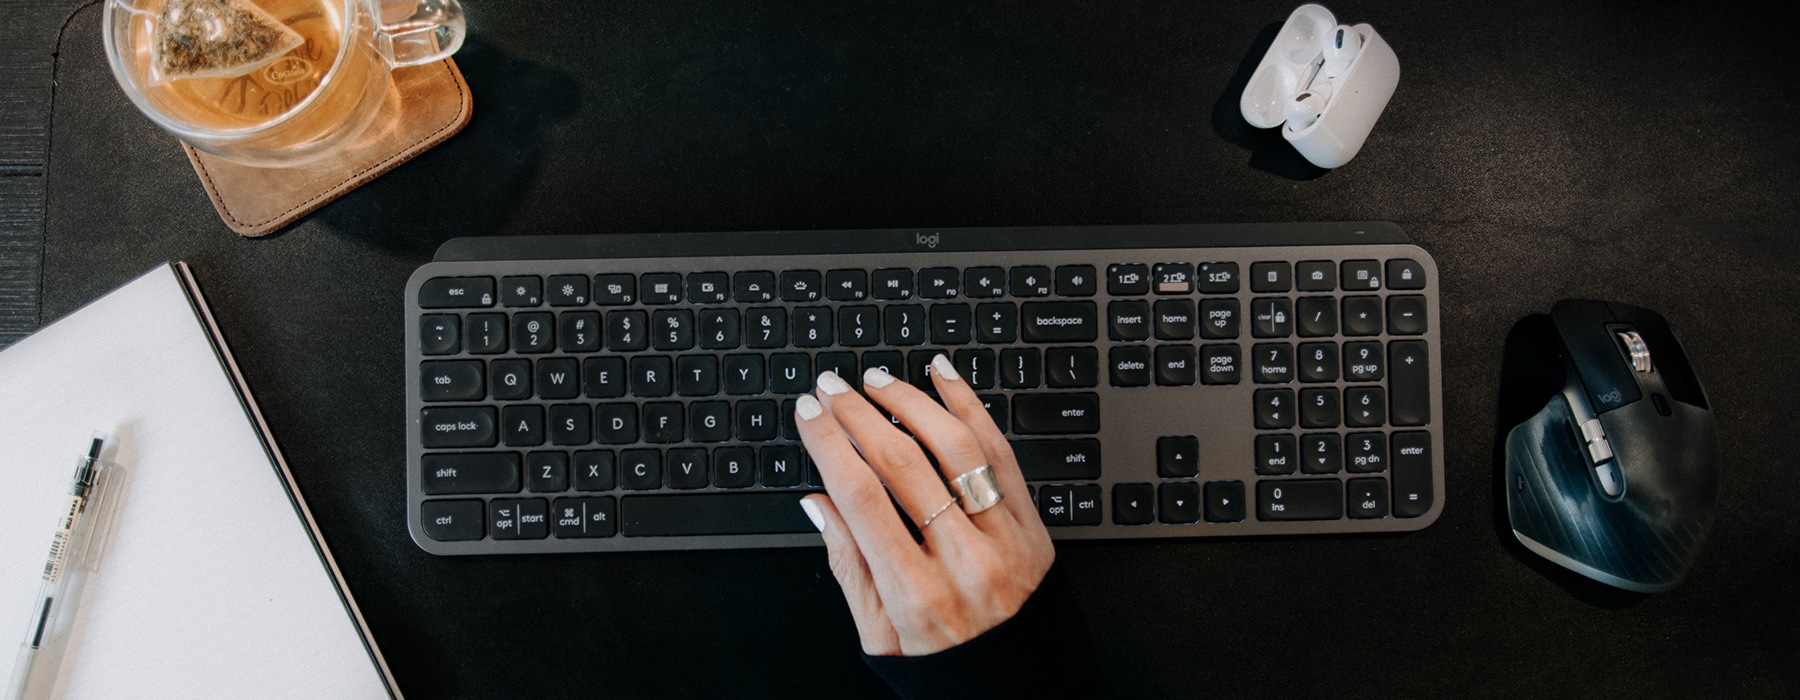 view from above of a woman's hands typing beside a coffee and office items